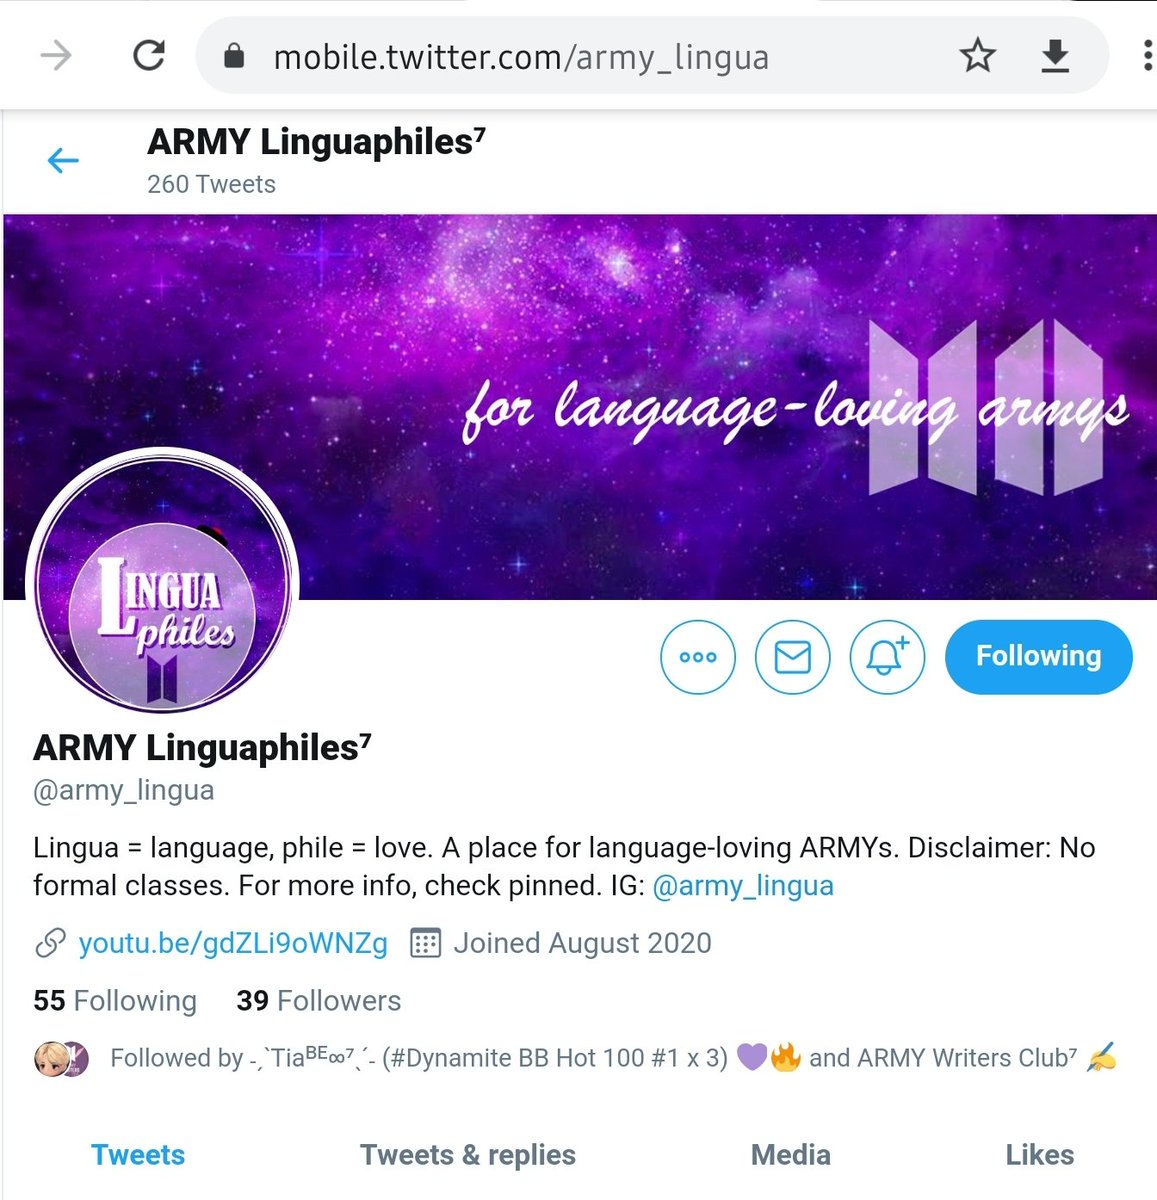 Want to practice the new language you just learned? -  @army_lingua Got the writing bug? -  @ARMYWritersClub What about a Music Magazine dedicated to BTS and ARMY? -  @Revolution_mag_Can't get enough of BTS content? -  @BorasaekVision  #BTSARMY  @BTS_twt